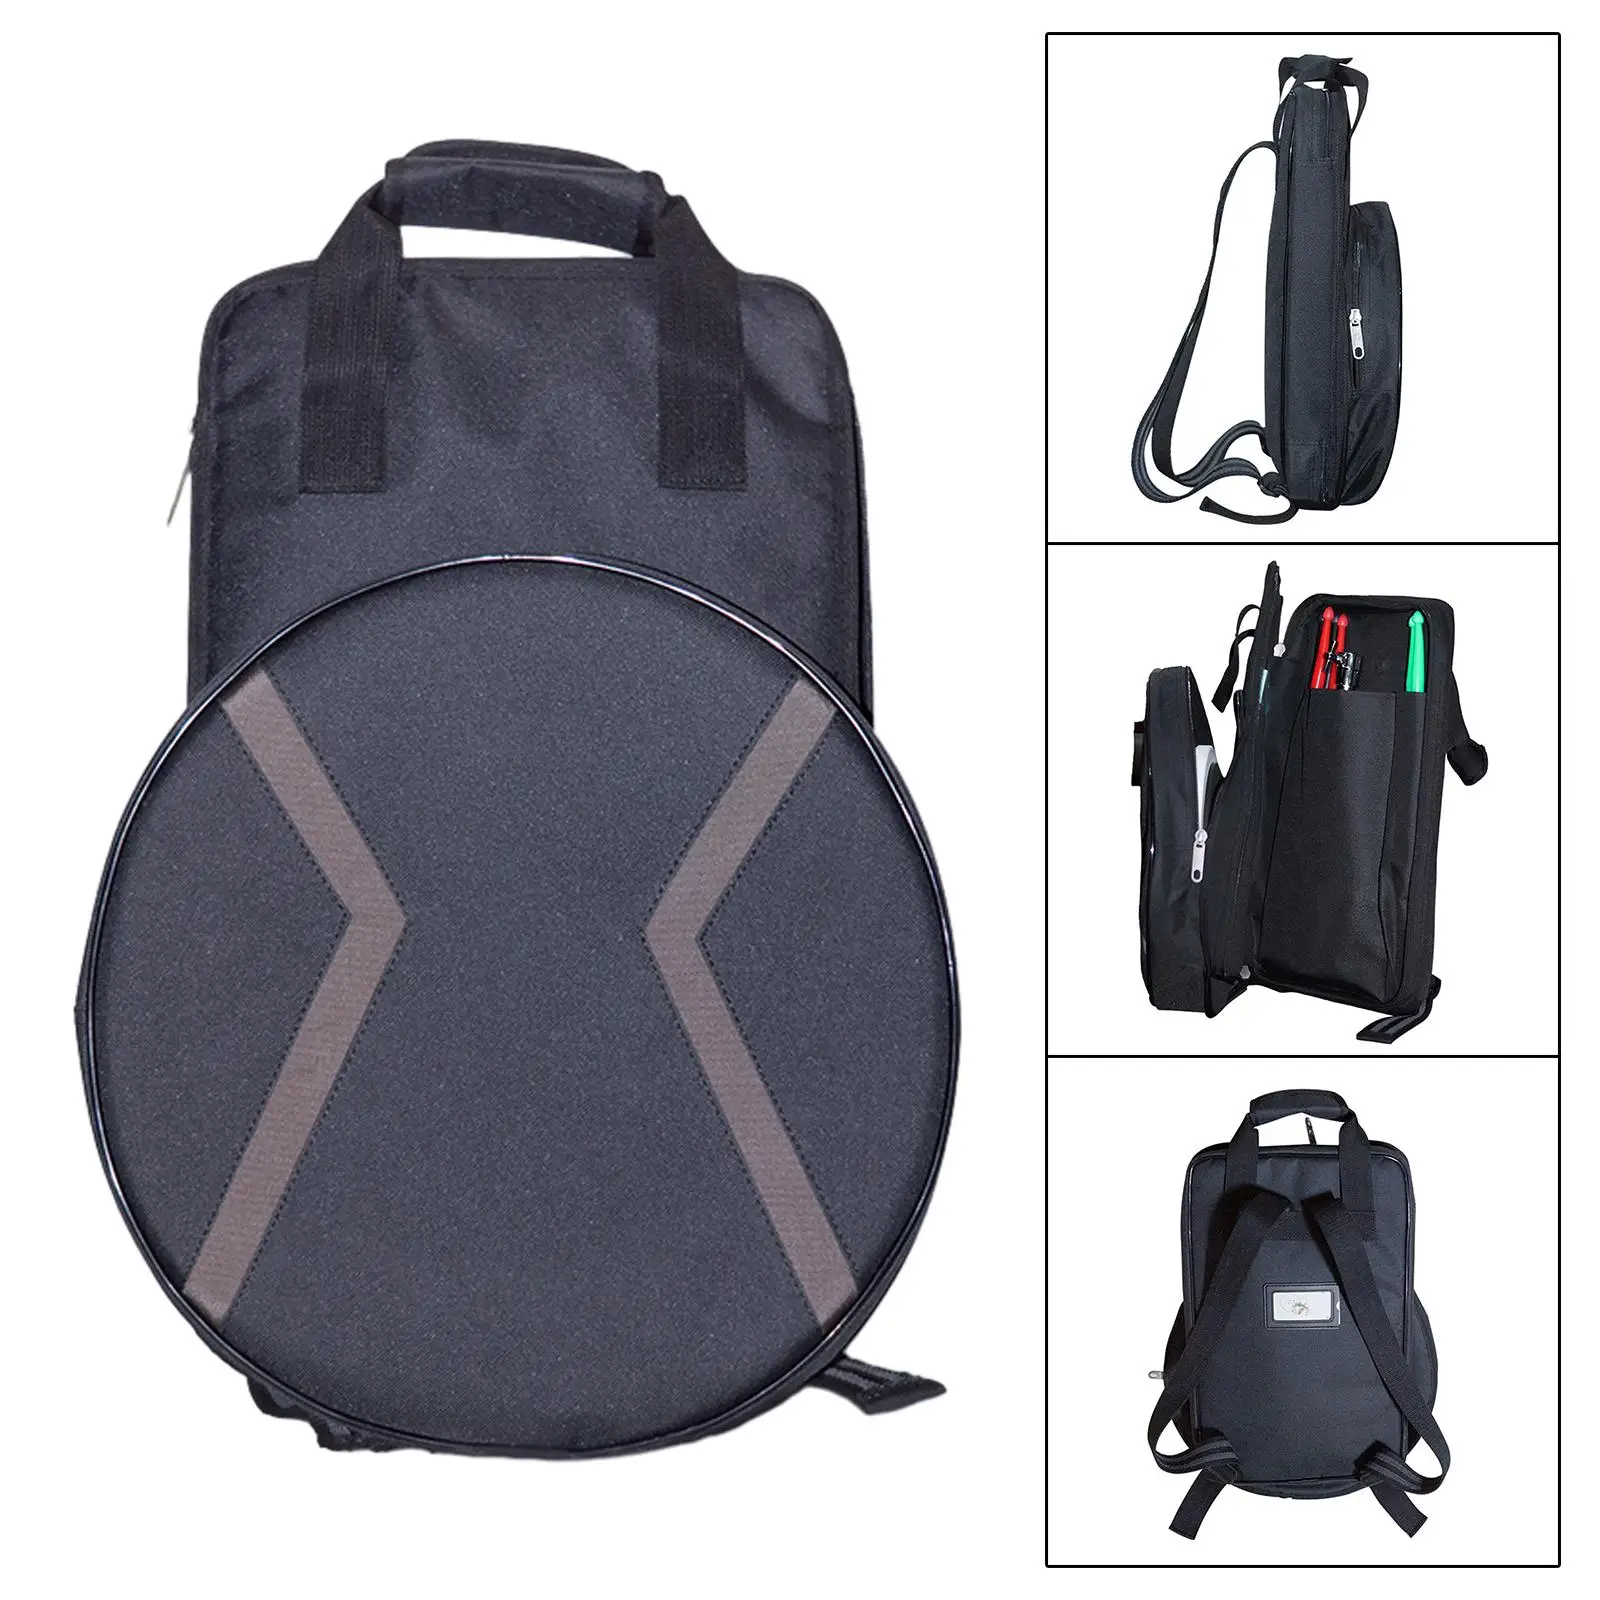 Dumb Drum Bag Waterproof Durable Backpack Easy to Carry Pad Bag for Professional Musician Tour Home Stage Performance